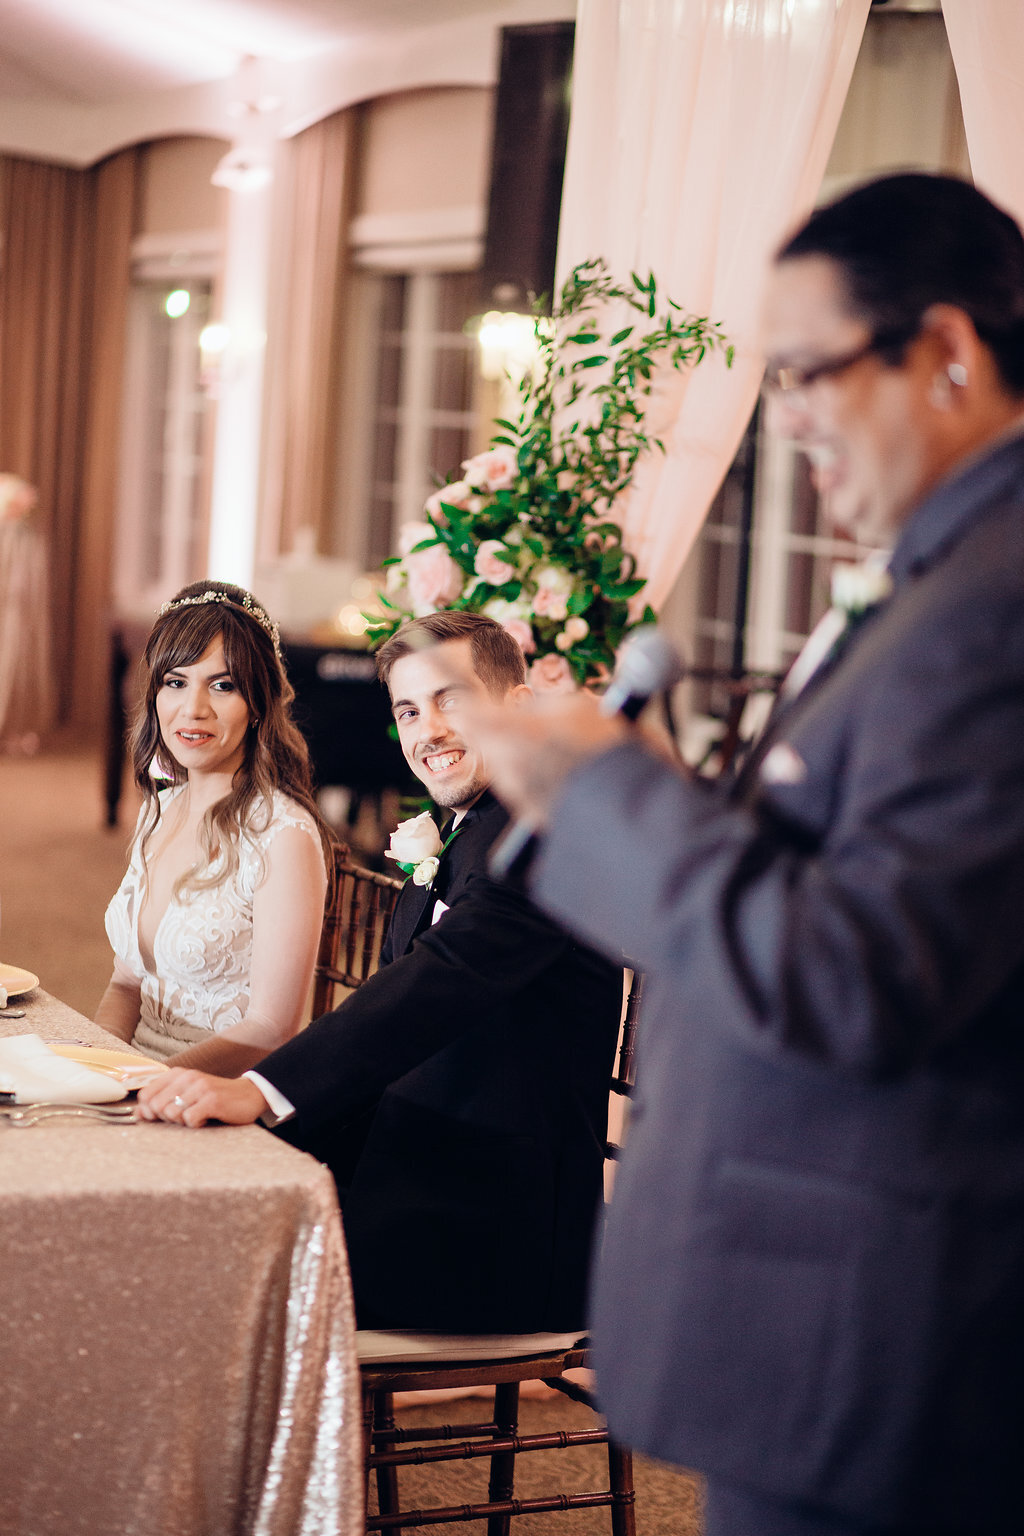 Wedding Photograph Of Bride And Groom Laughing At The Man Speaking In The Microphone Los Angeles